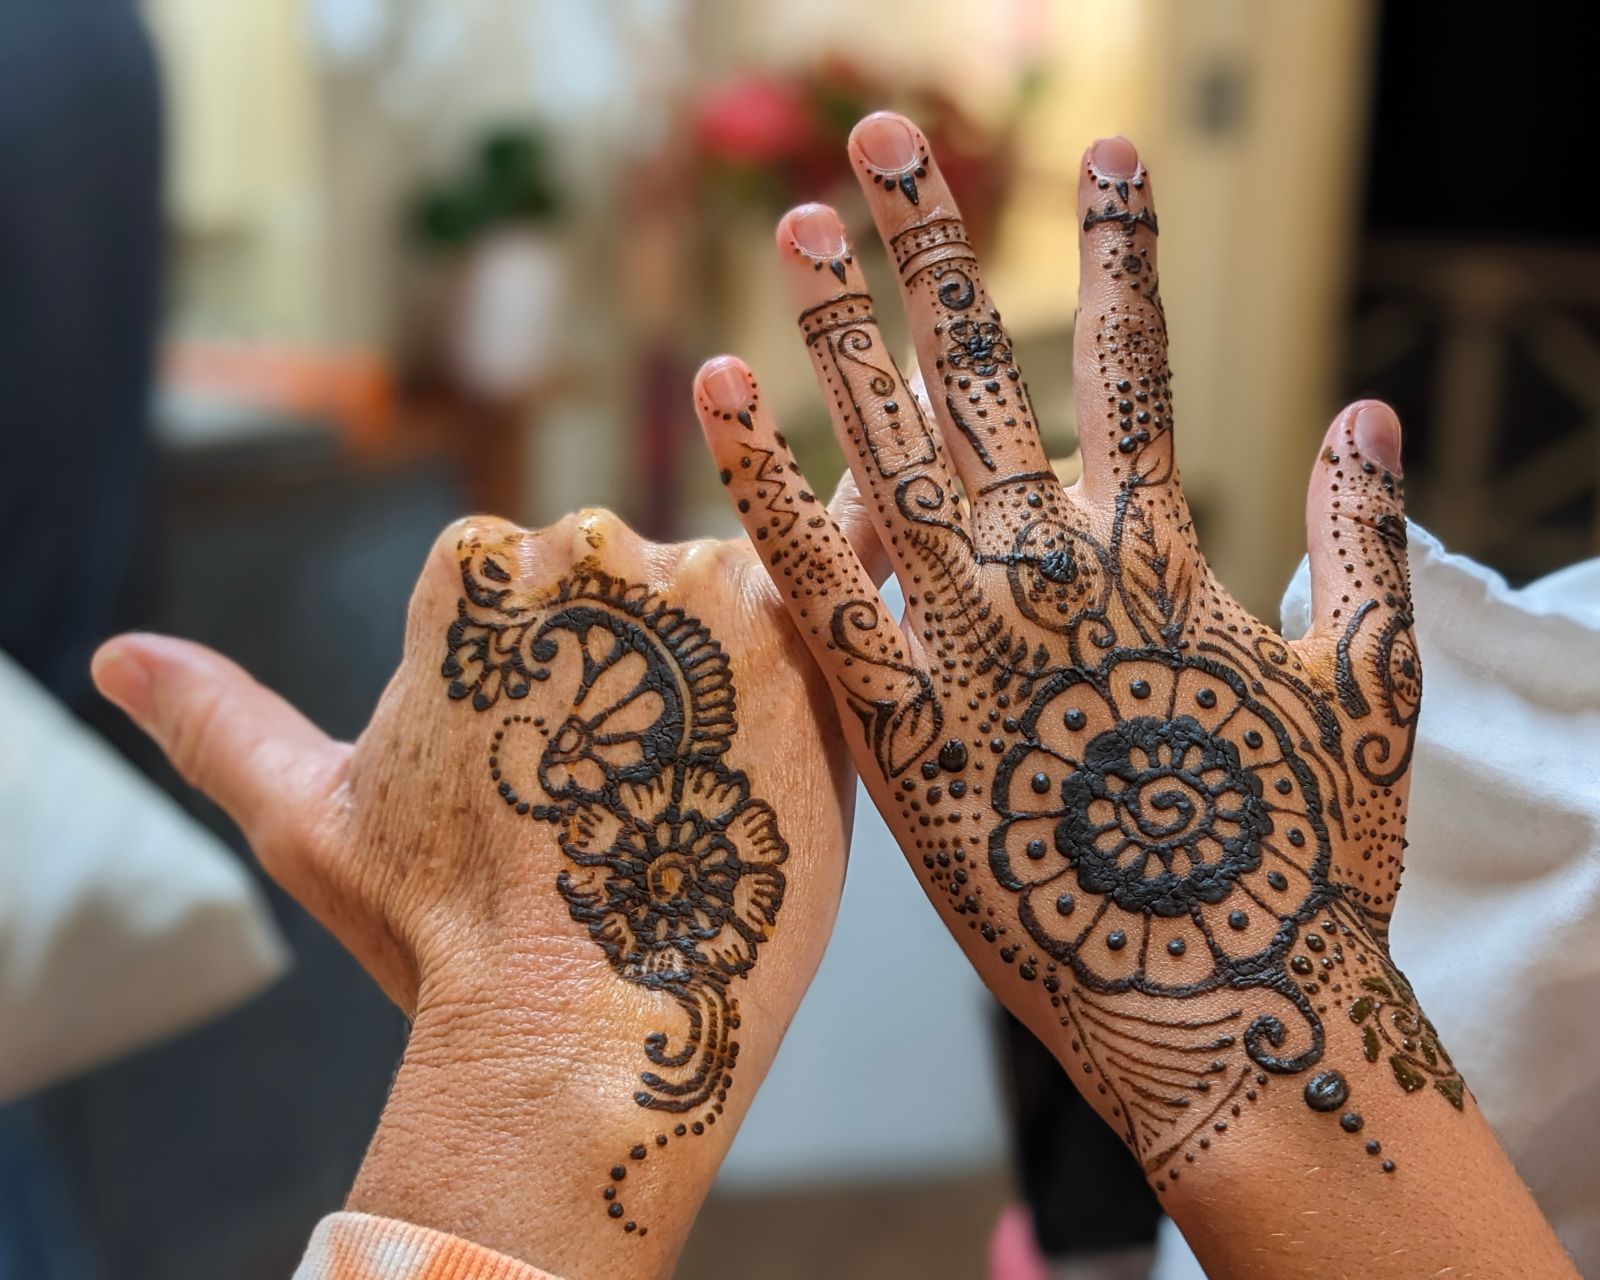 Creative Outlet: Henna Your Intentions